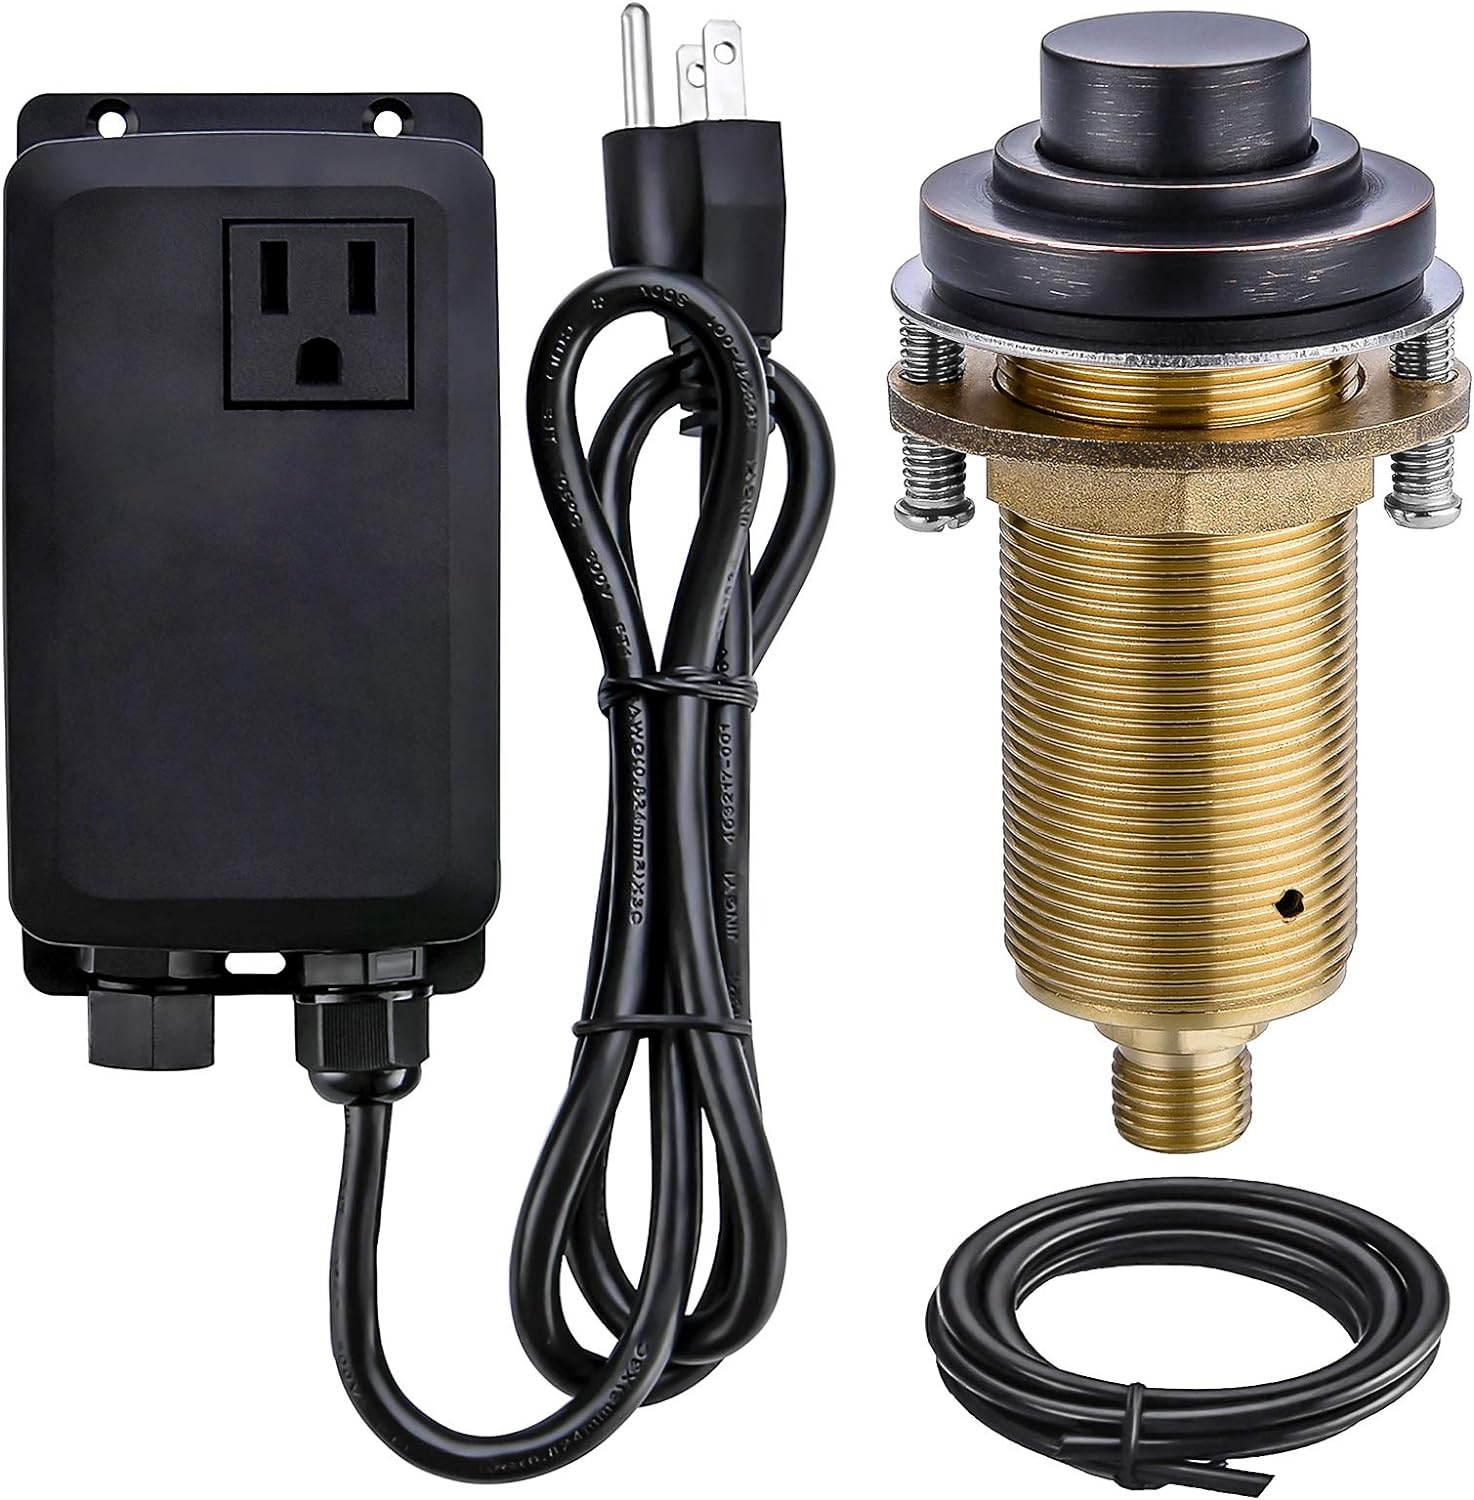 SINKINGDOM SinkTop Air Switch Kit with Oil Rubbed Bronze Long Button (Full Brass) for Garbage Disposal, Single Outlet